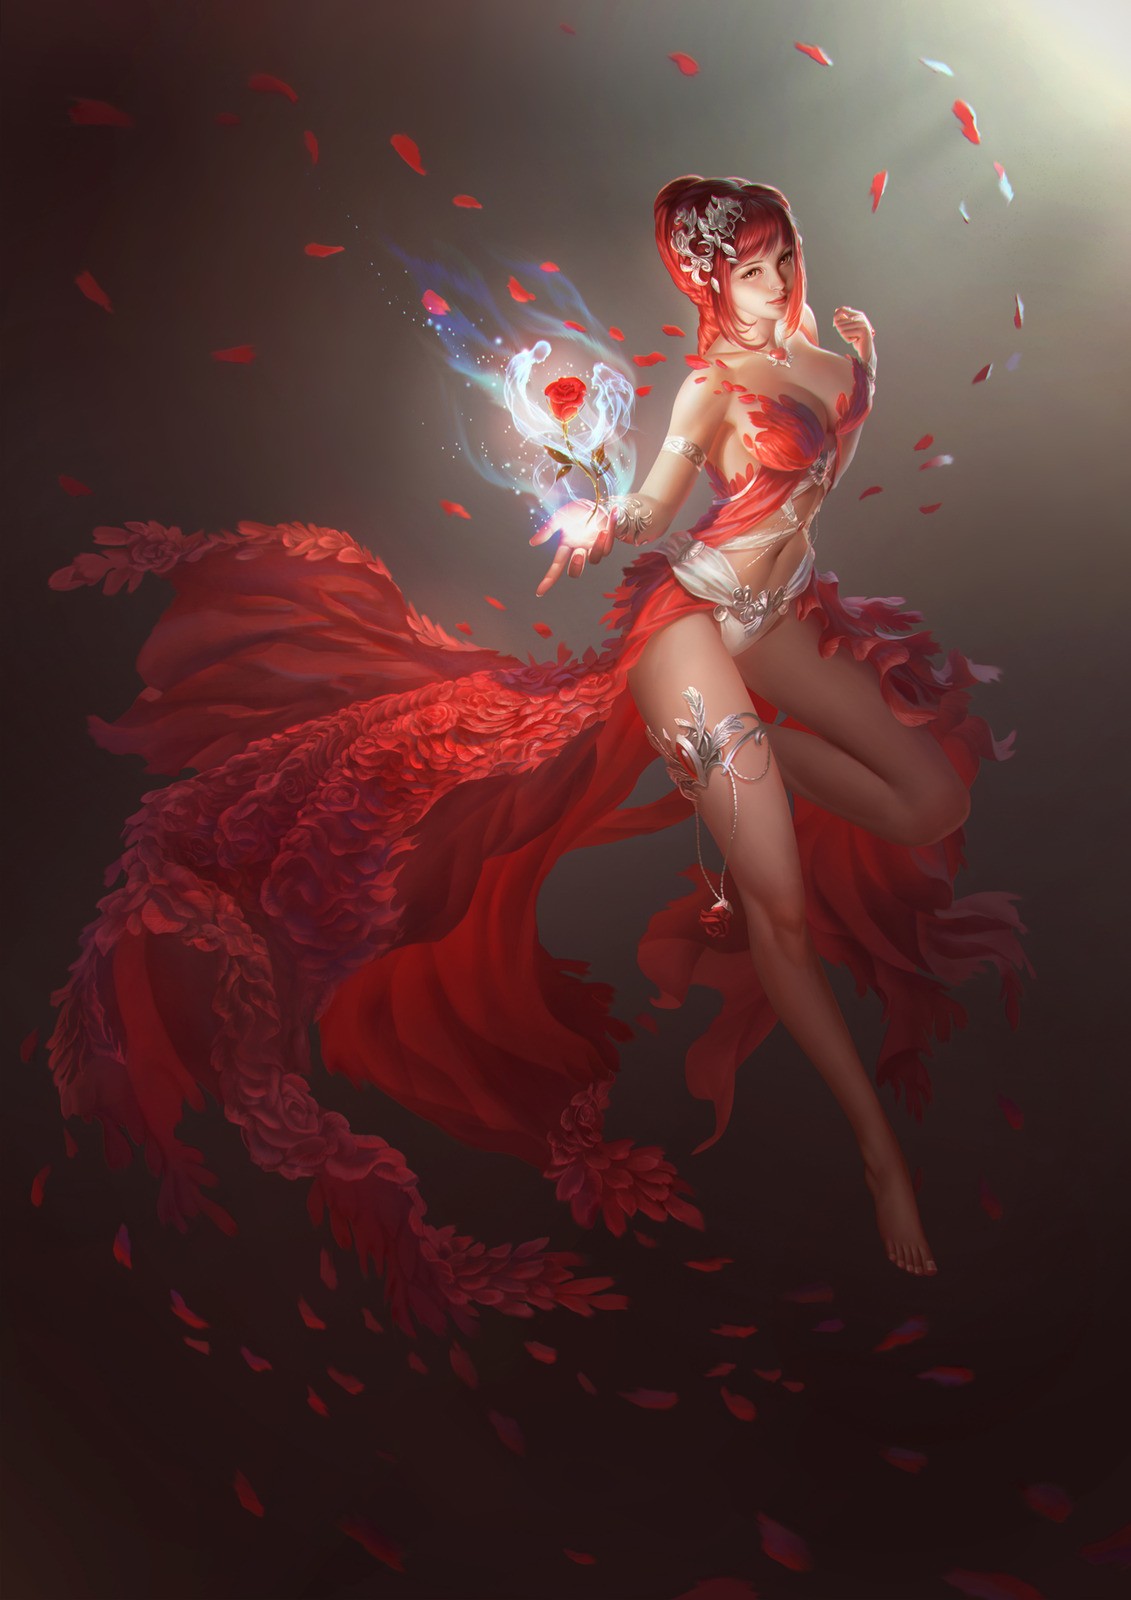 General 1131x1600 Beauty and the Beast fantasy girl fantasy art artwork red redhead legs boobs belly panties simple background women rose flowers plants red flowers barefoot